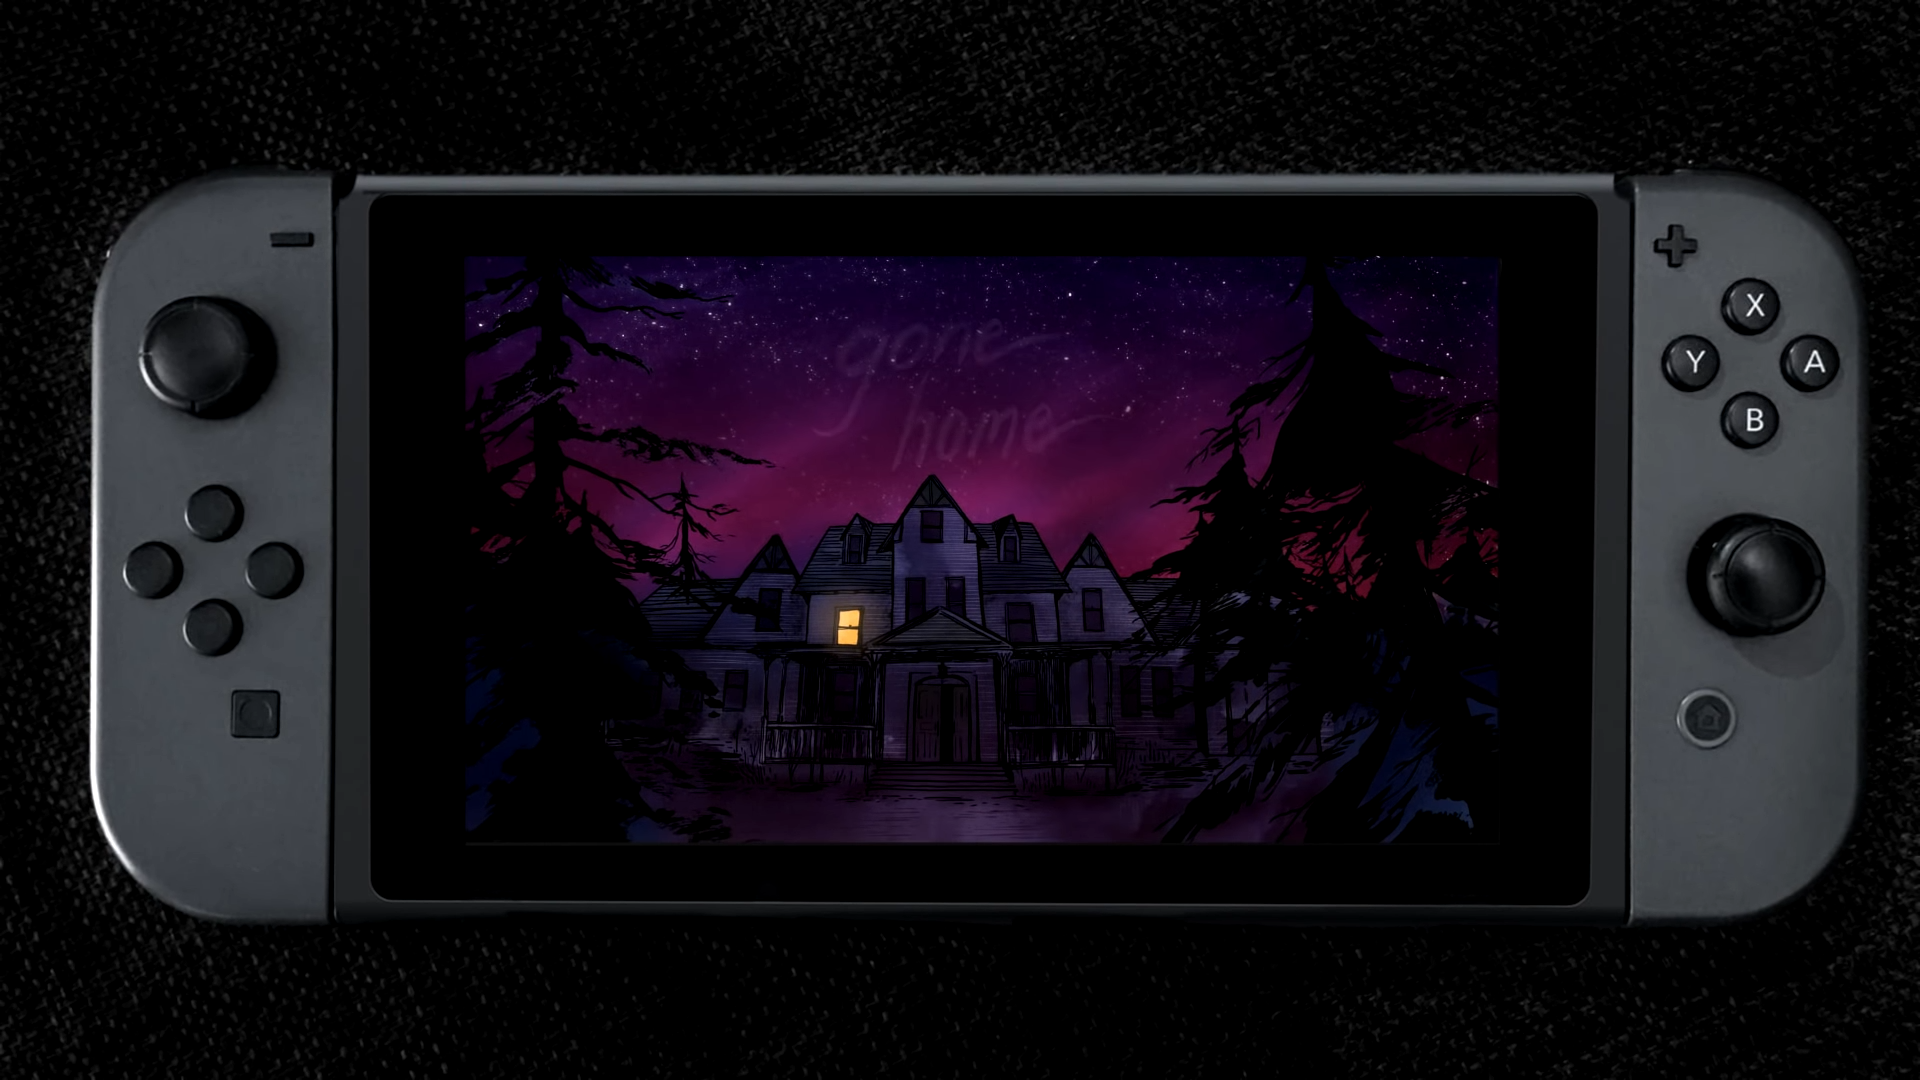 Go home game. Gone Home. Home игра. Нинтендо Home. Gone Home (2013).